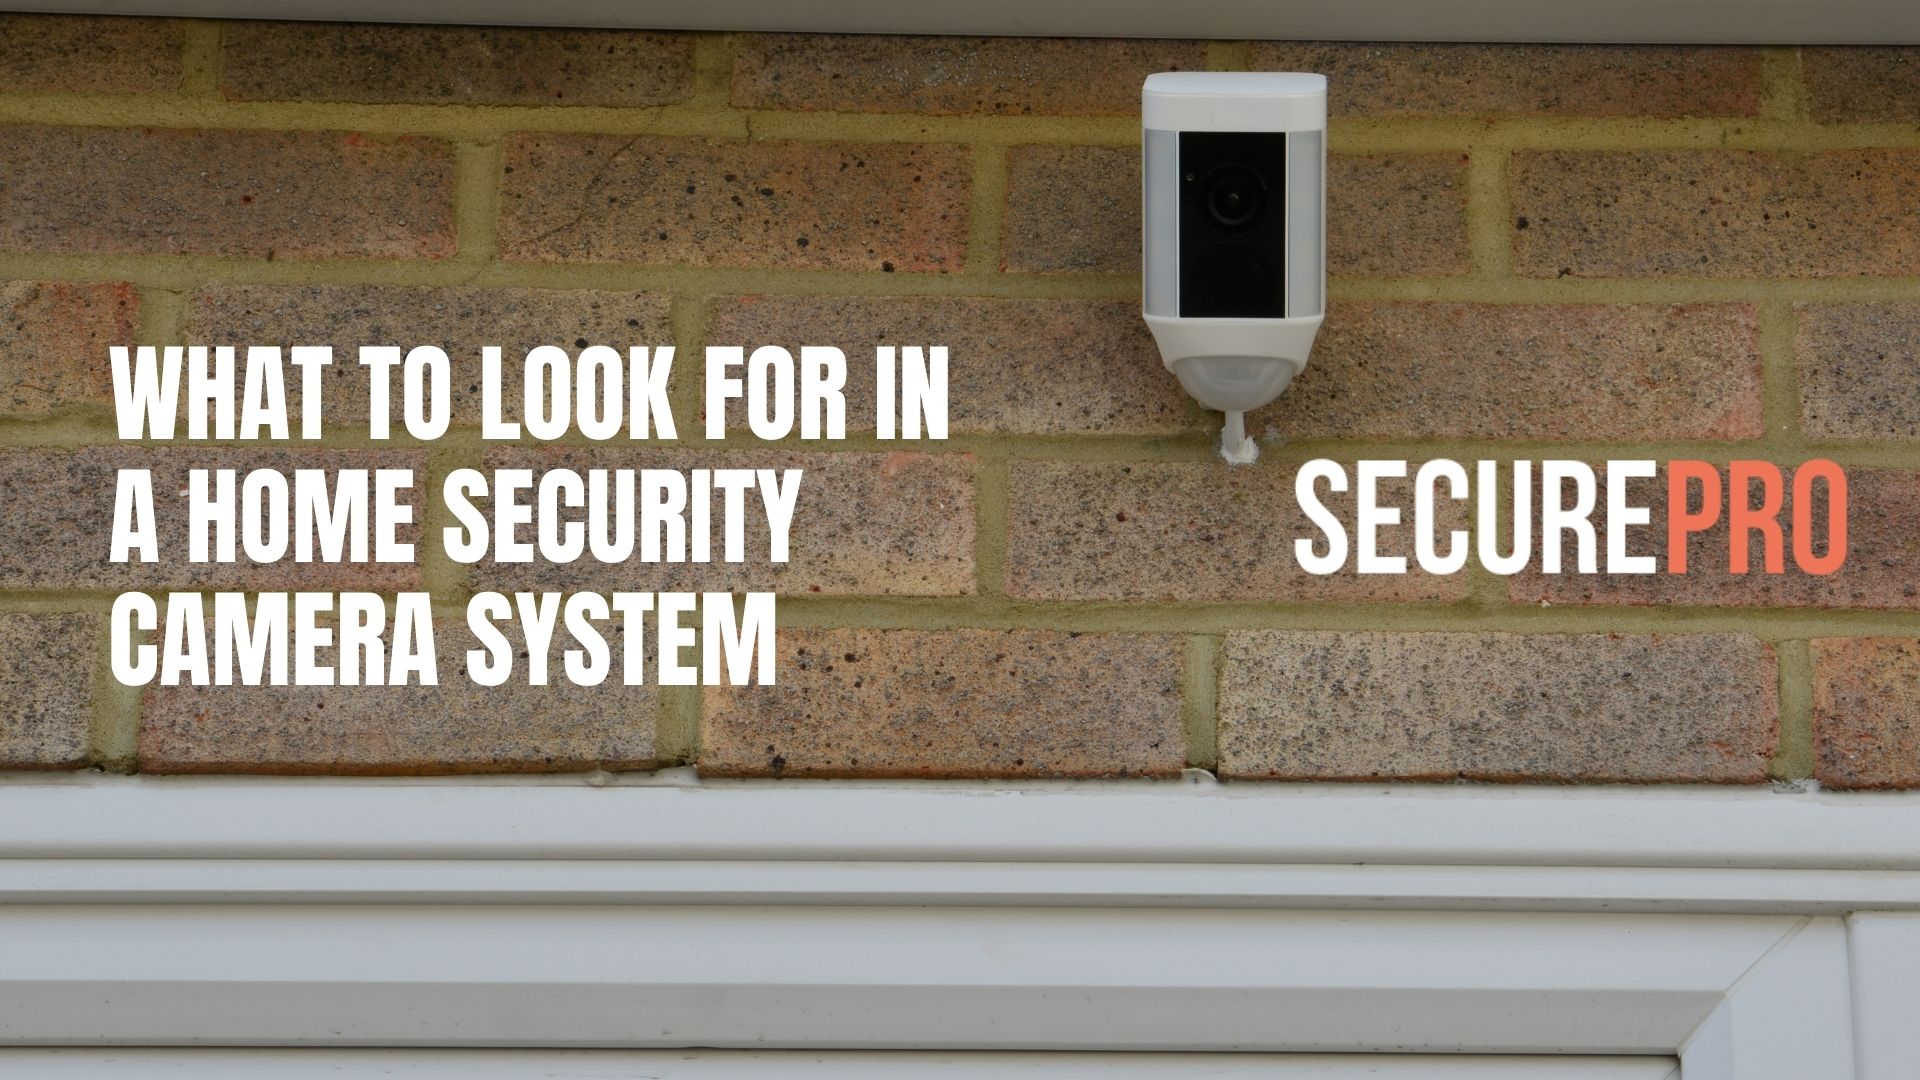 home security system